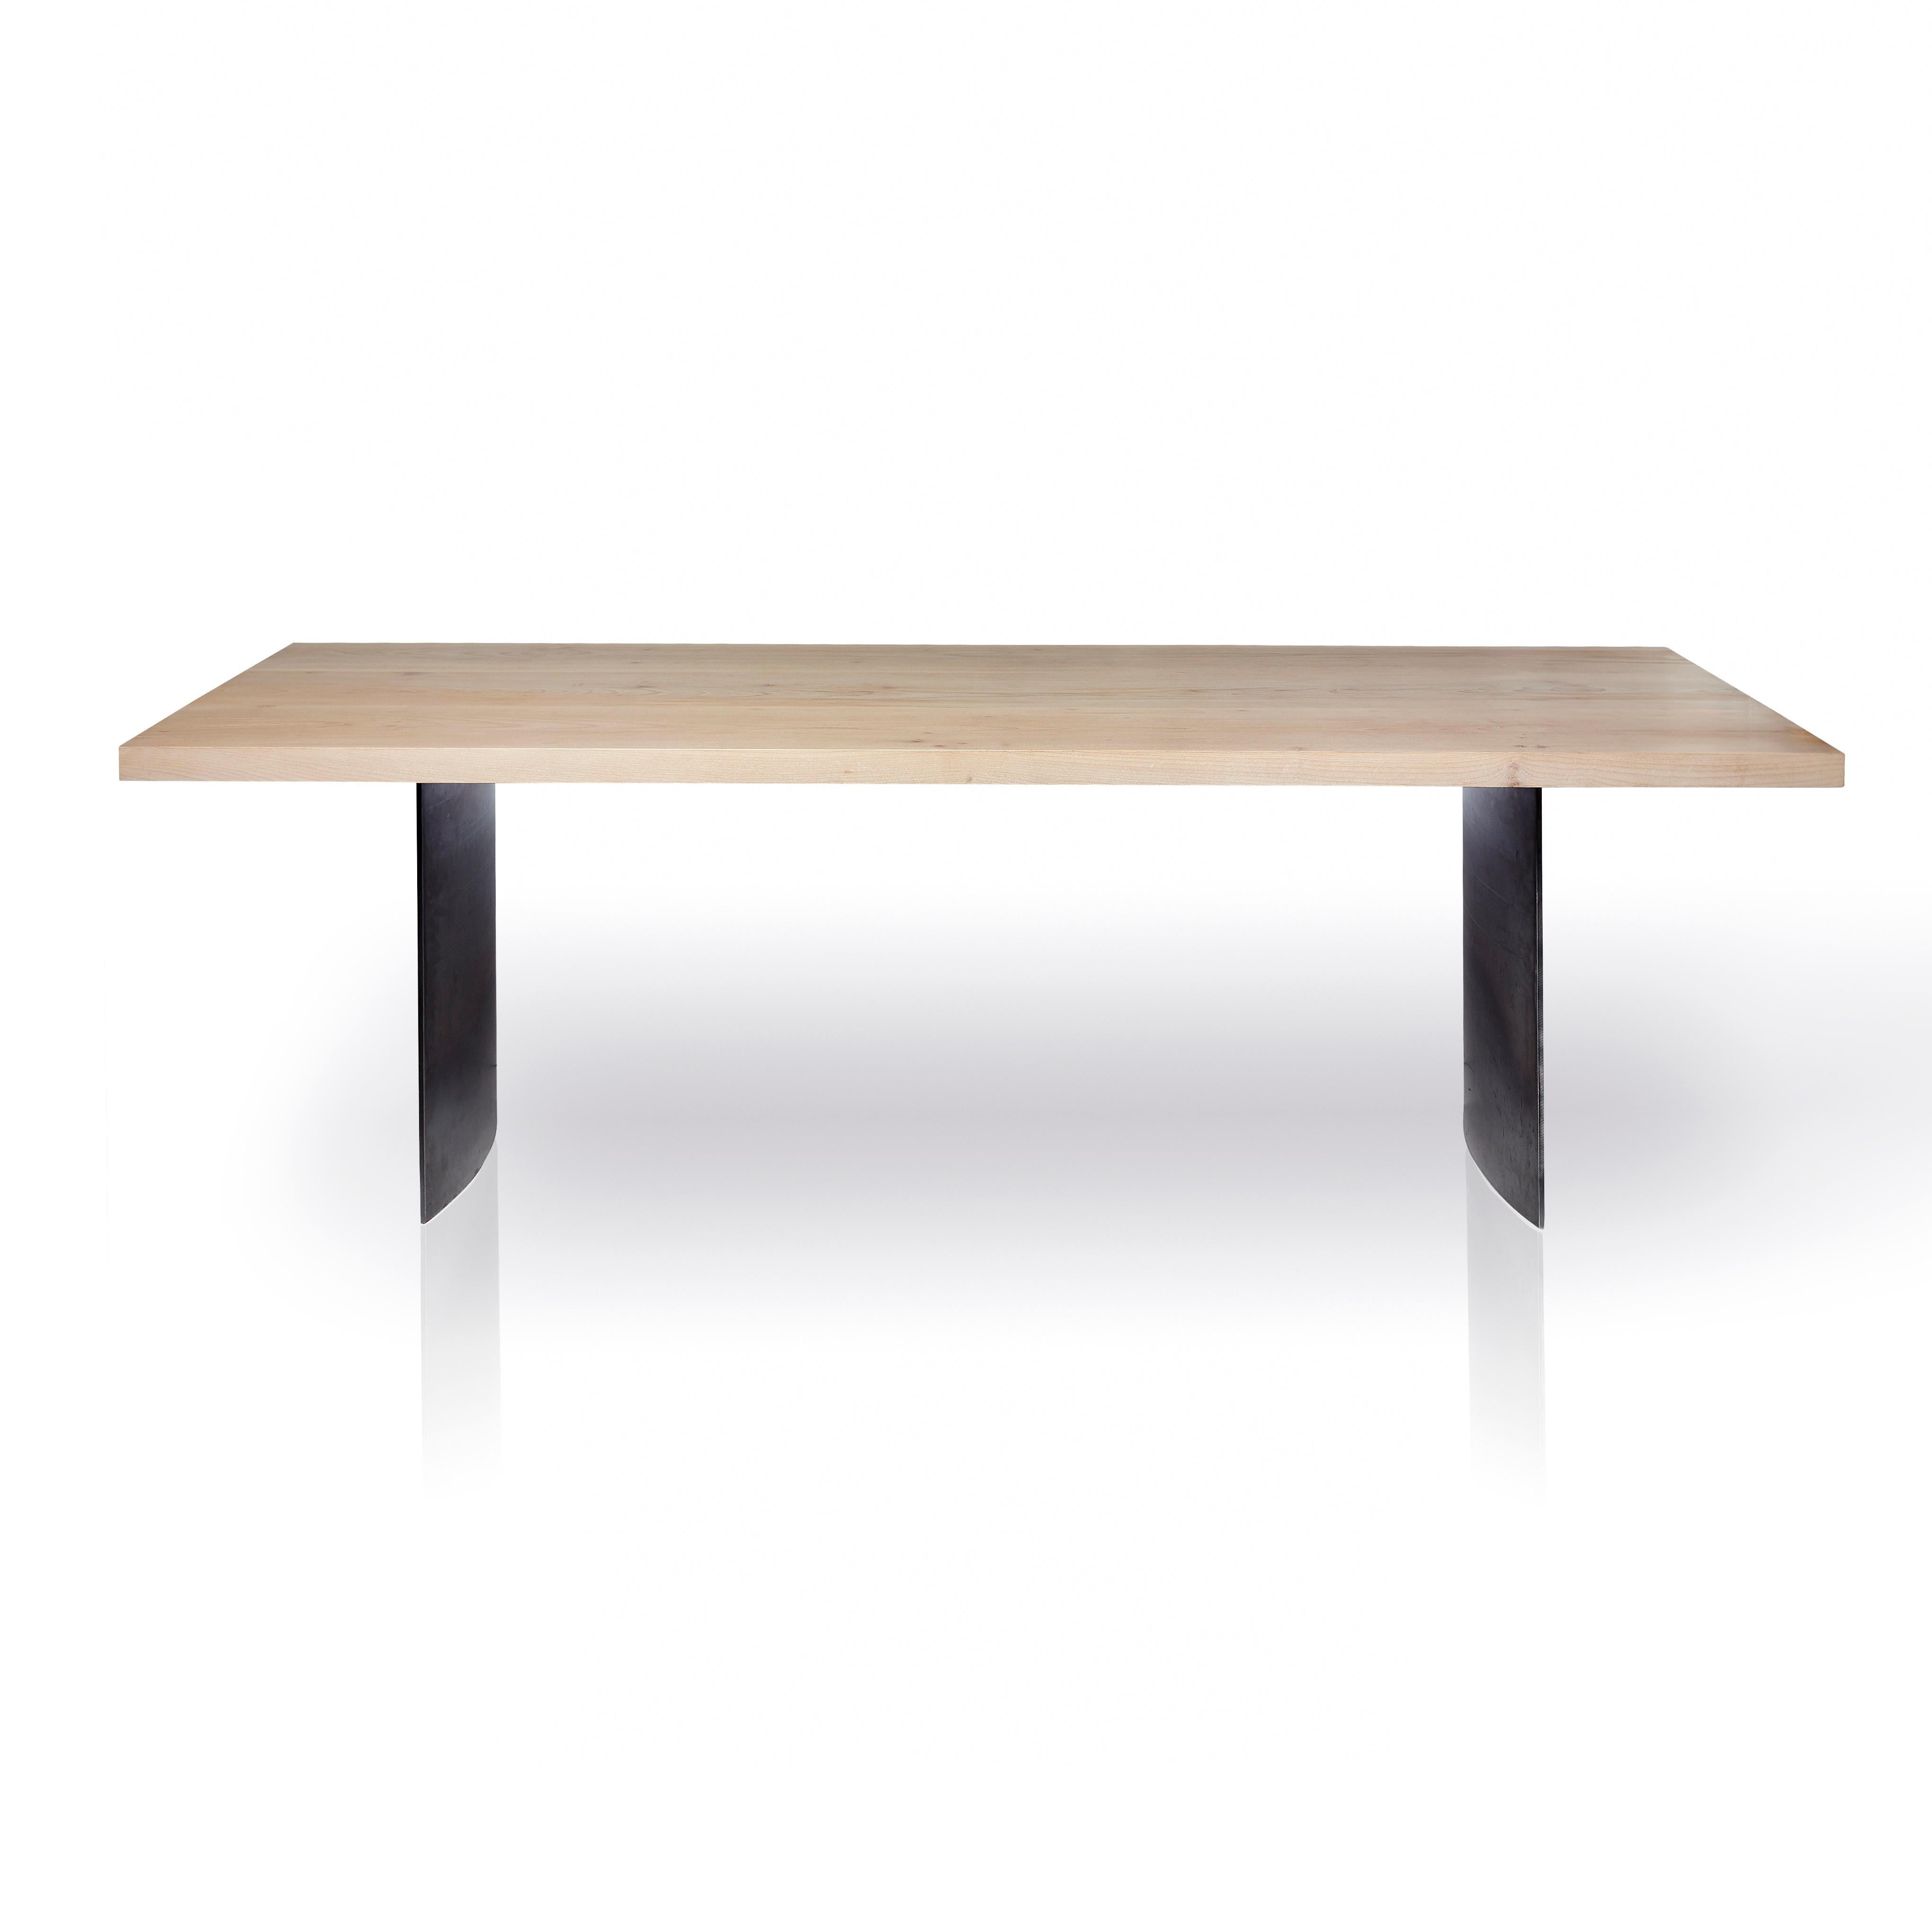 The Ban table uses whitewashed Western maple, influenced by Scandinavian design, set on 3/8